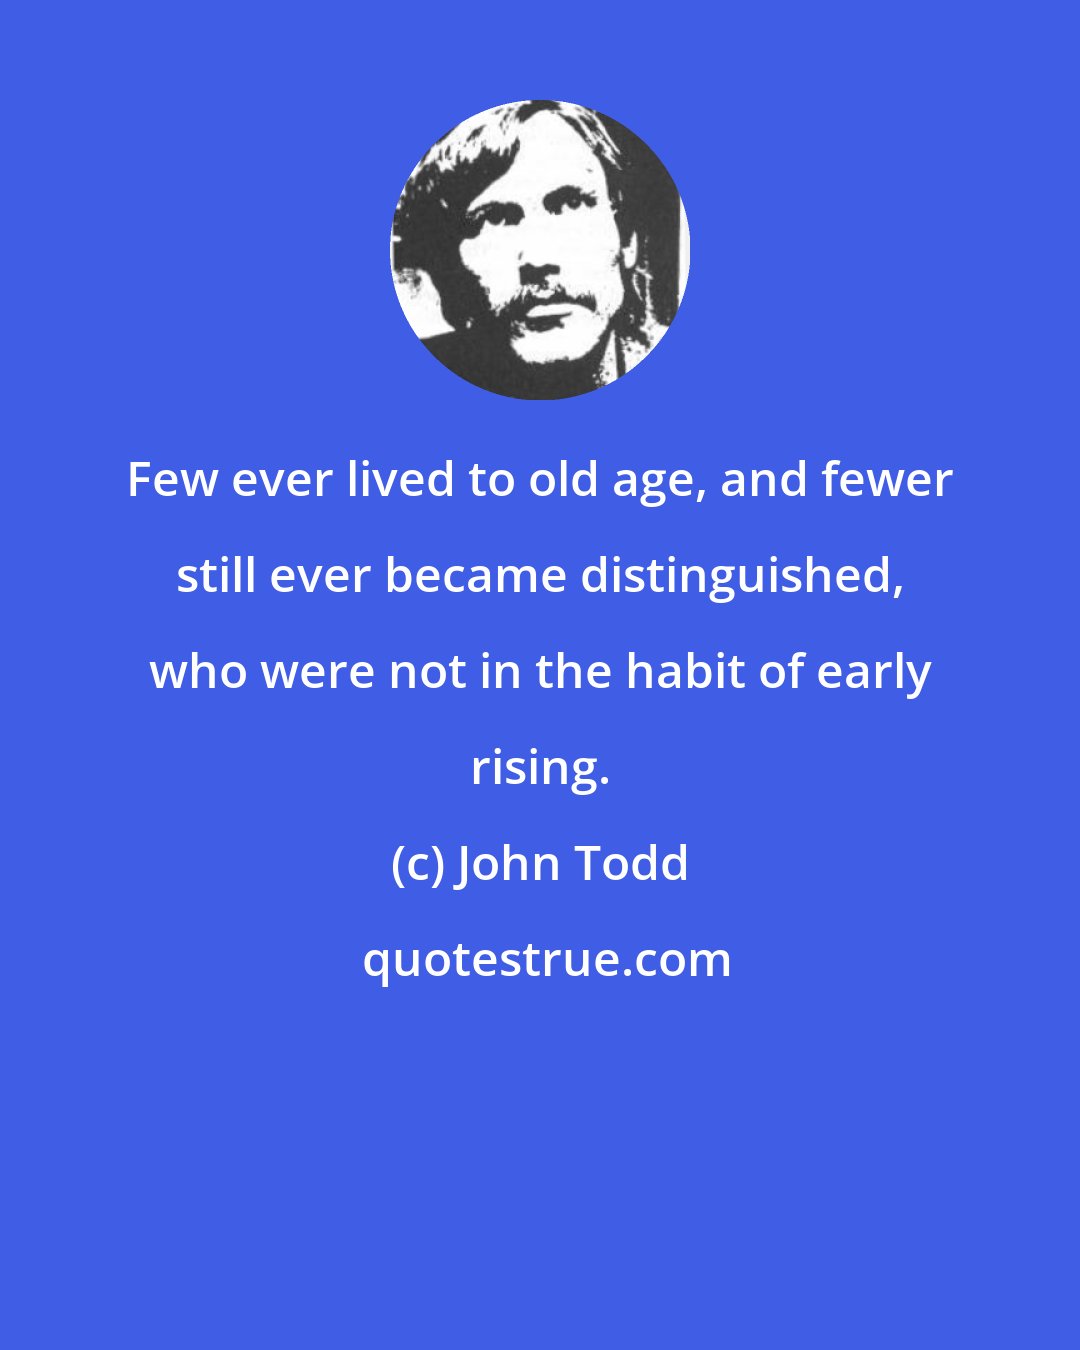 John Todd: Few ever lived to old age, and fewer still ever became distinguished, who were not in the habit of early rising.